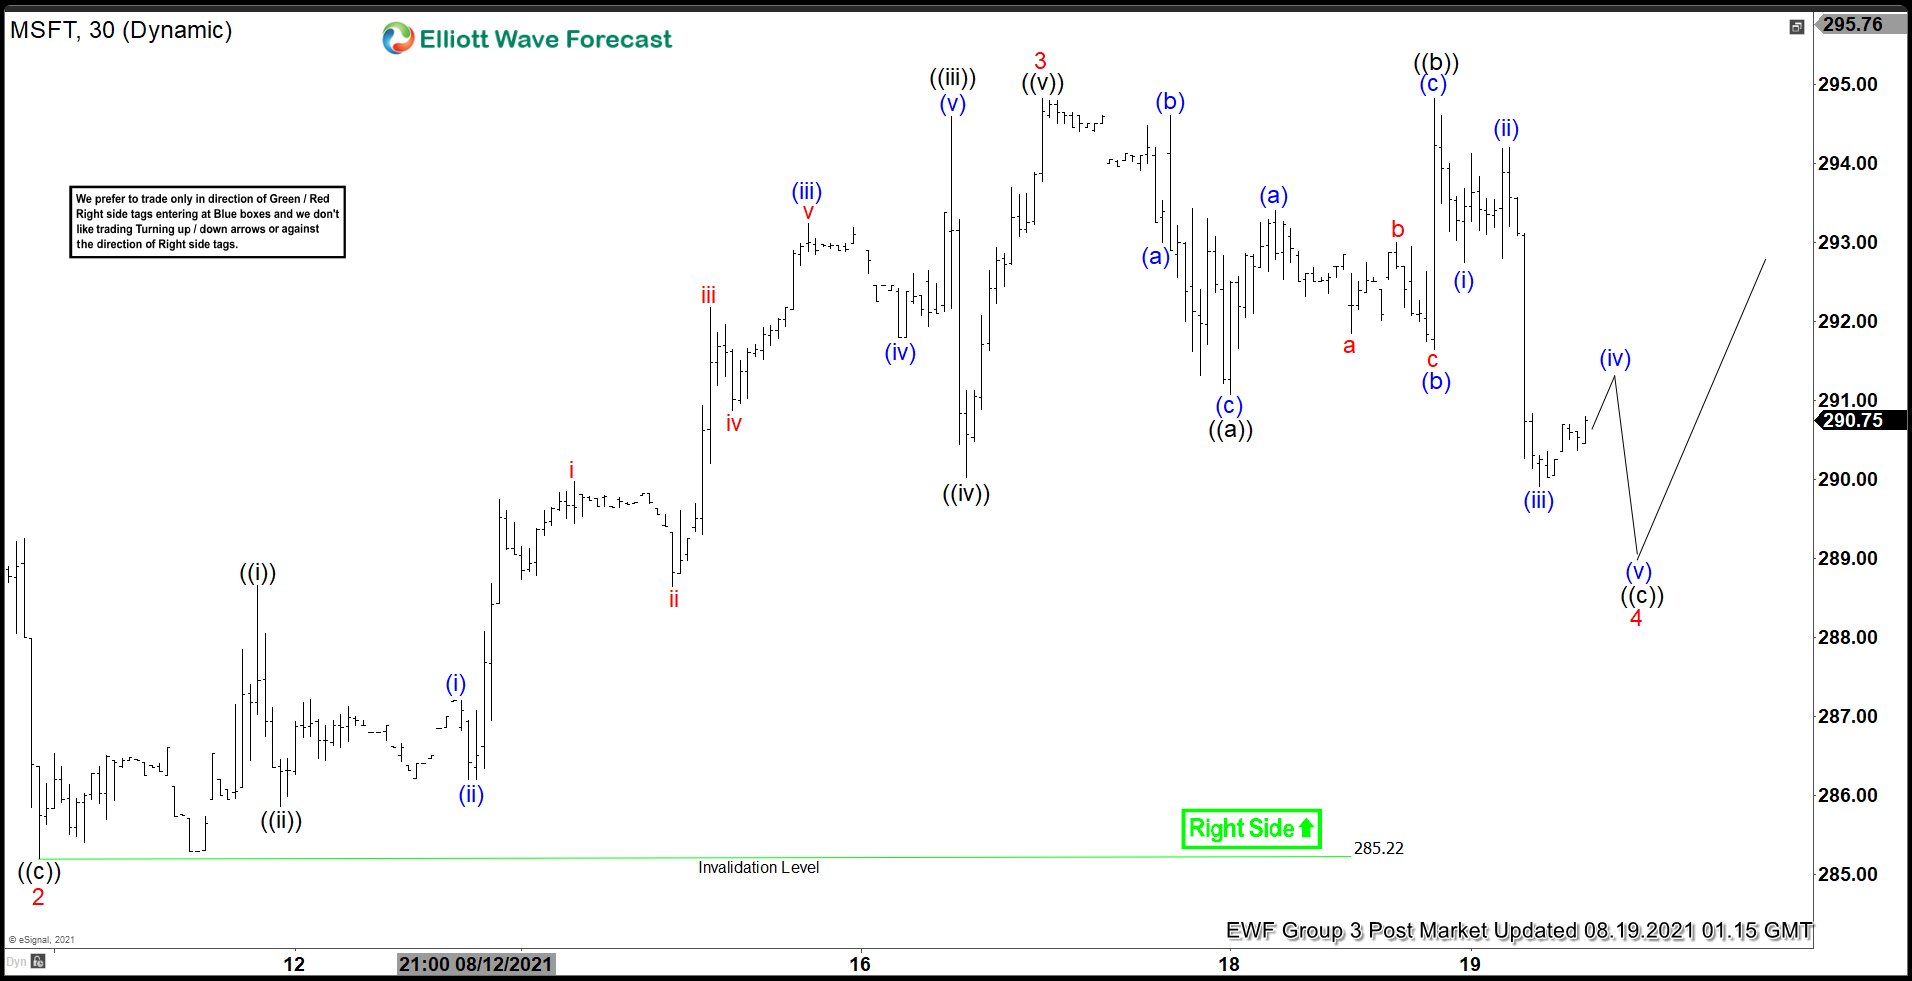 Microsoft $MSFT Forecasting The Rally After Elliott Wave Flat